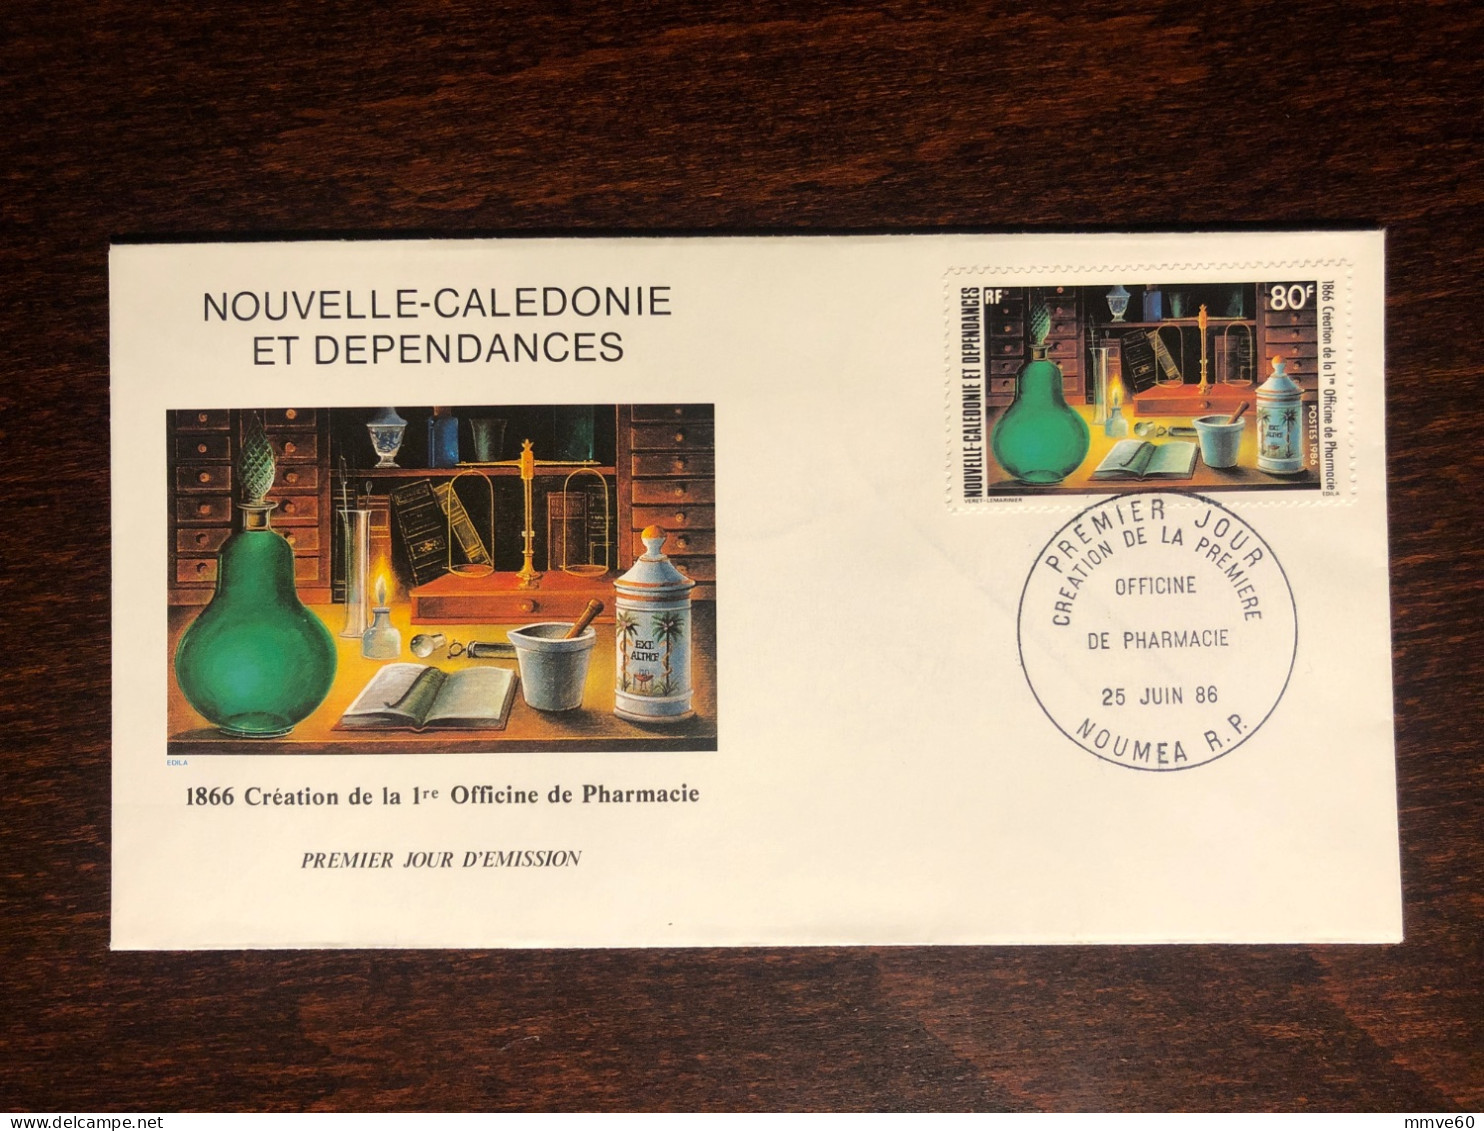 NEW CALEDONIA NOUVELLE CALEDONIE FDC COVER 1986 YEAR PHARMACY PHARMACEUTICAL HEALTH MEDICINE - Briefe U. Dokumente